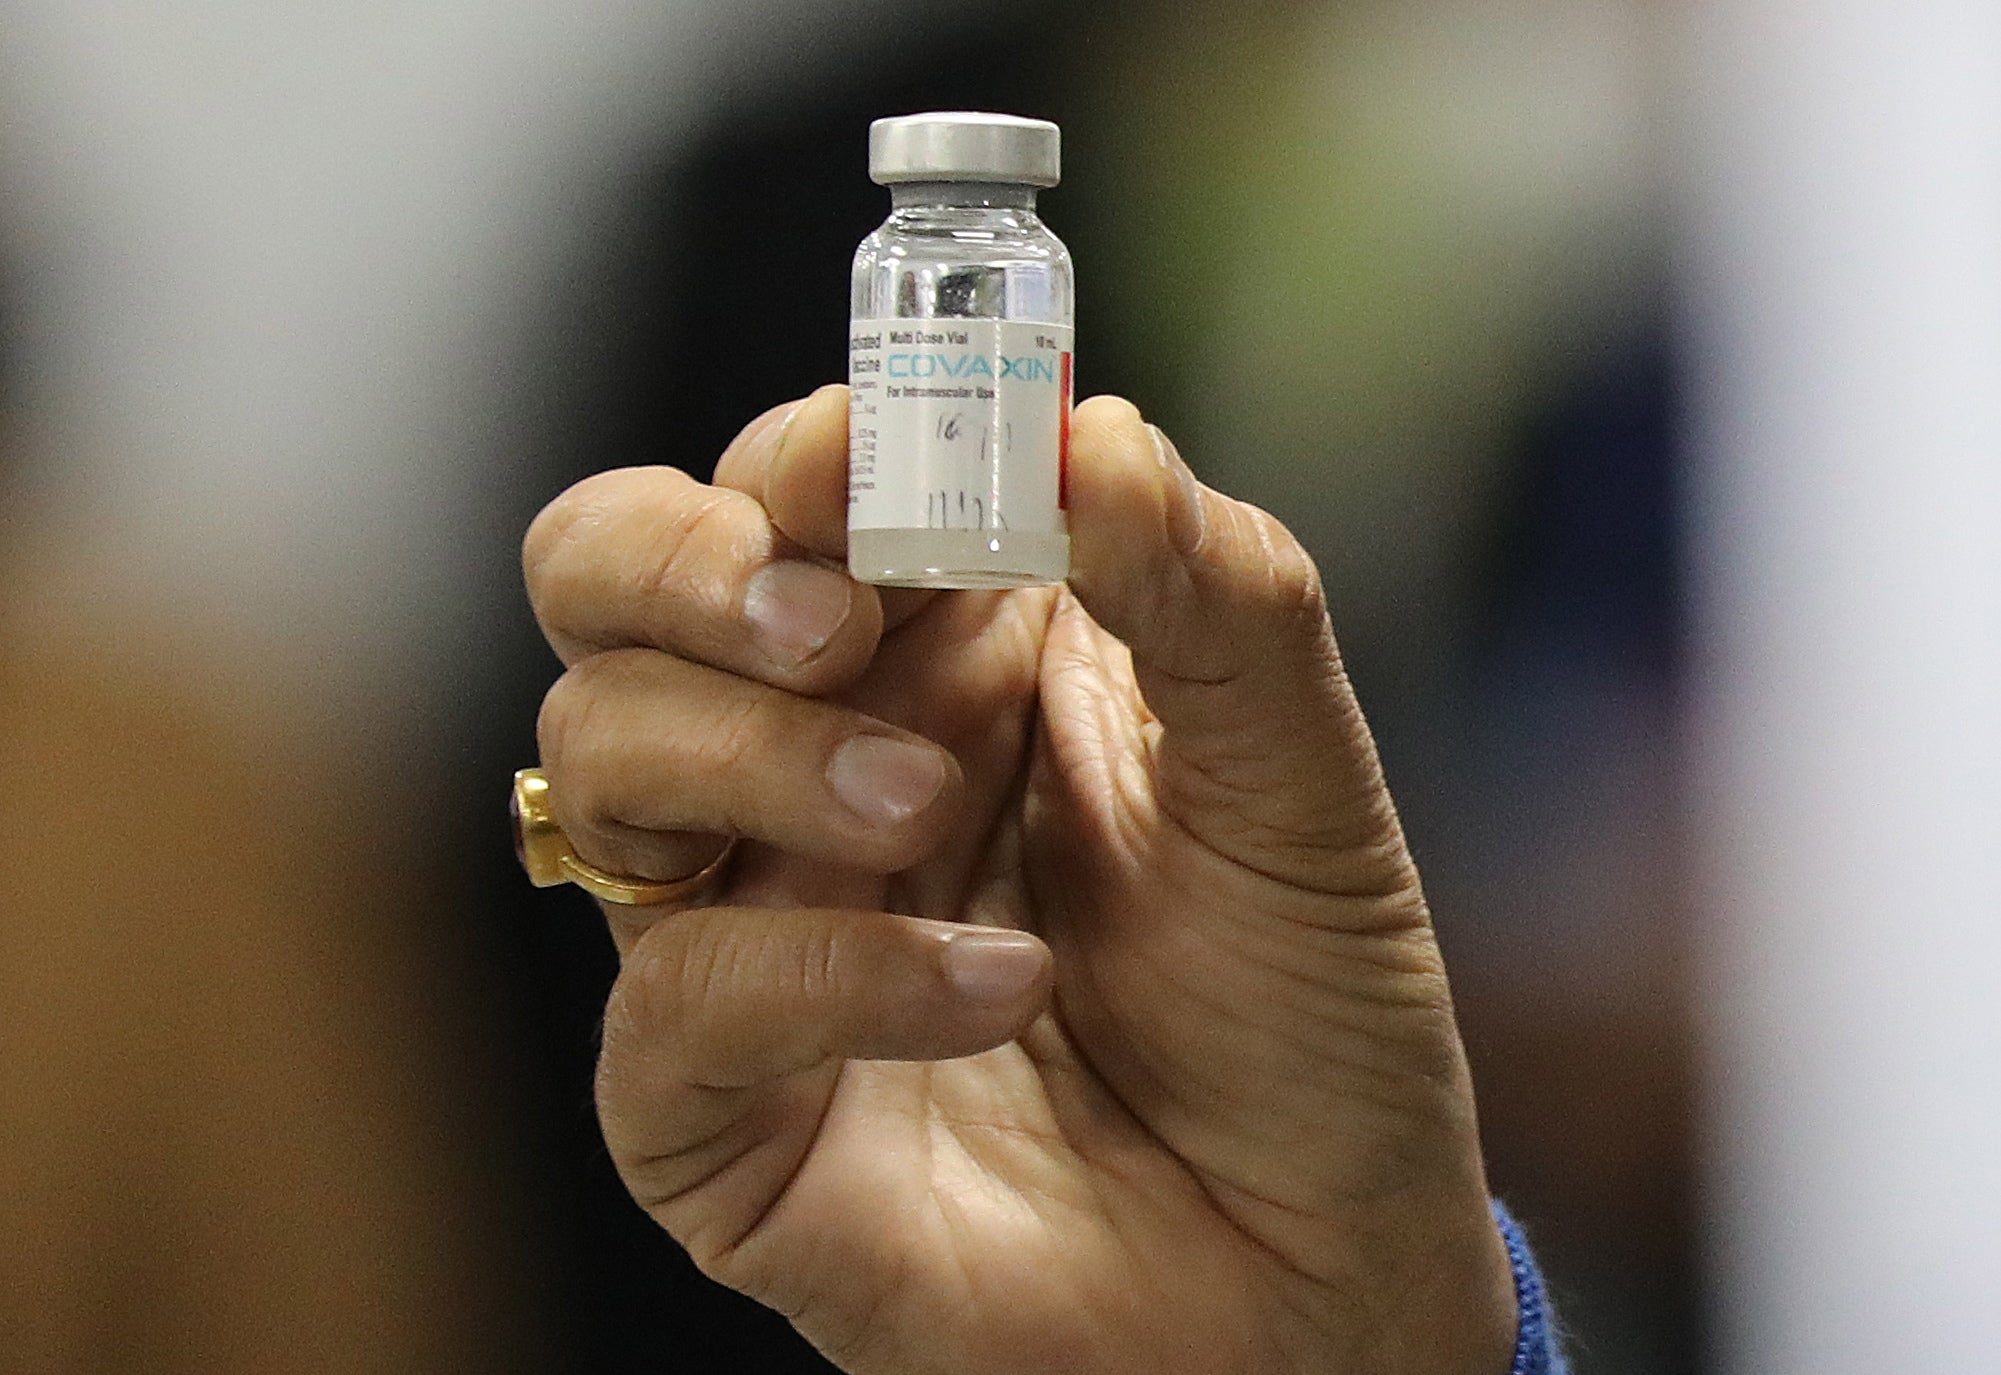 India has given emergency approval for the use ofBharat Biotech’s Covid-19 vaccine&nbsp;